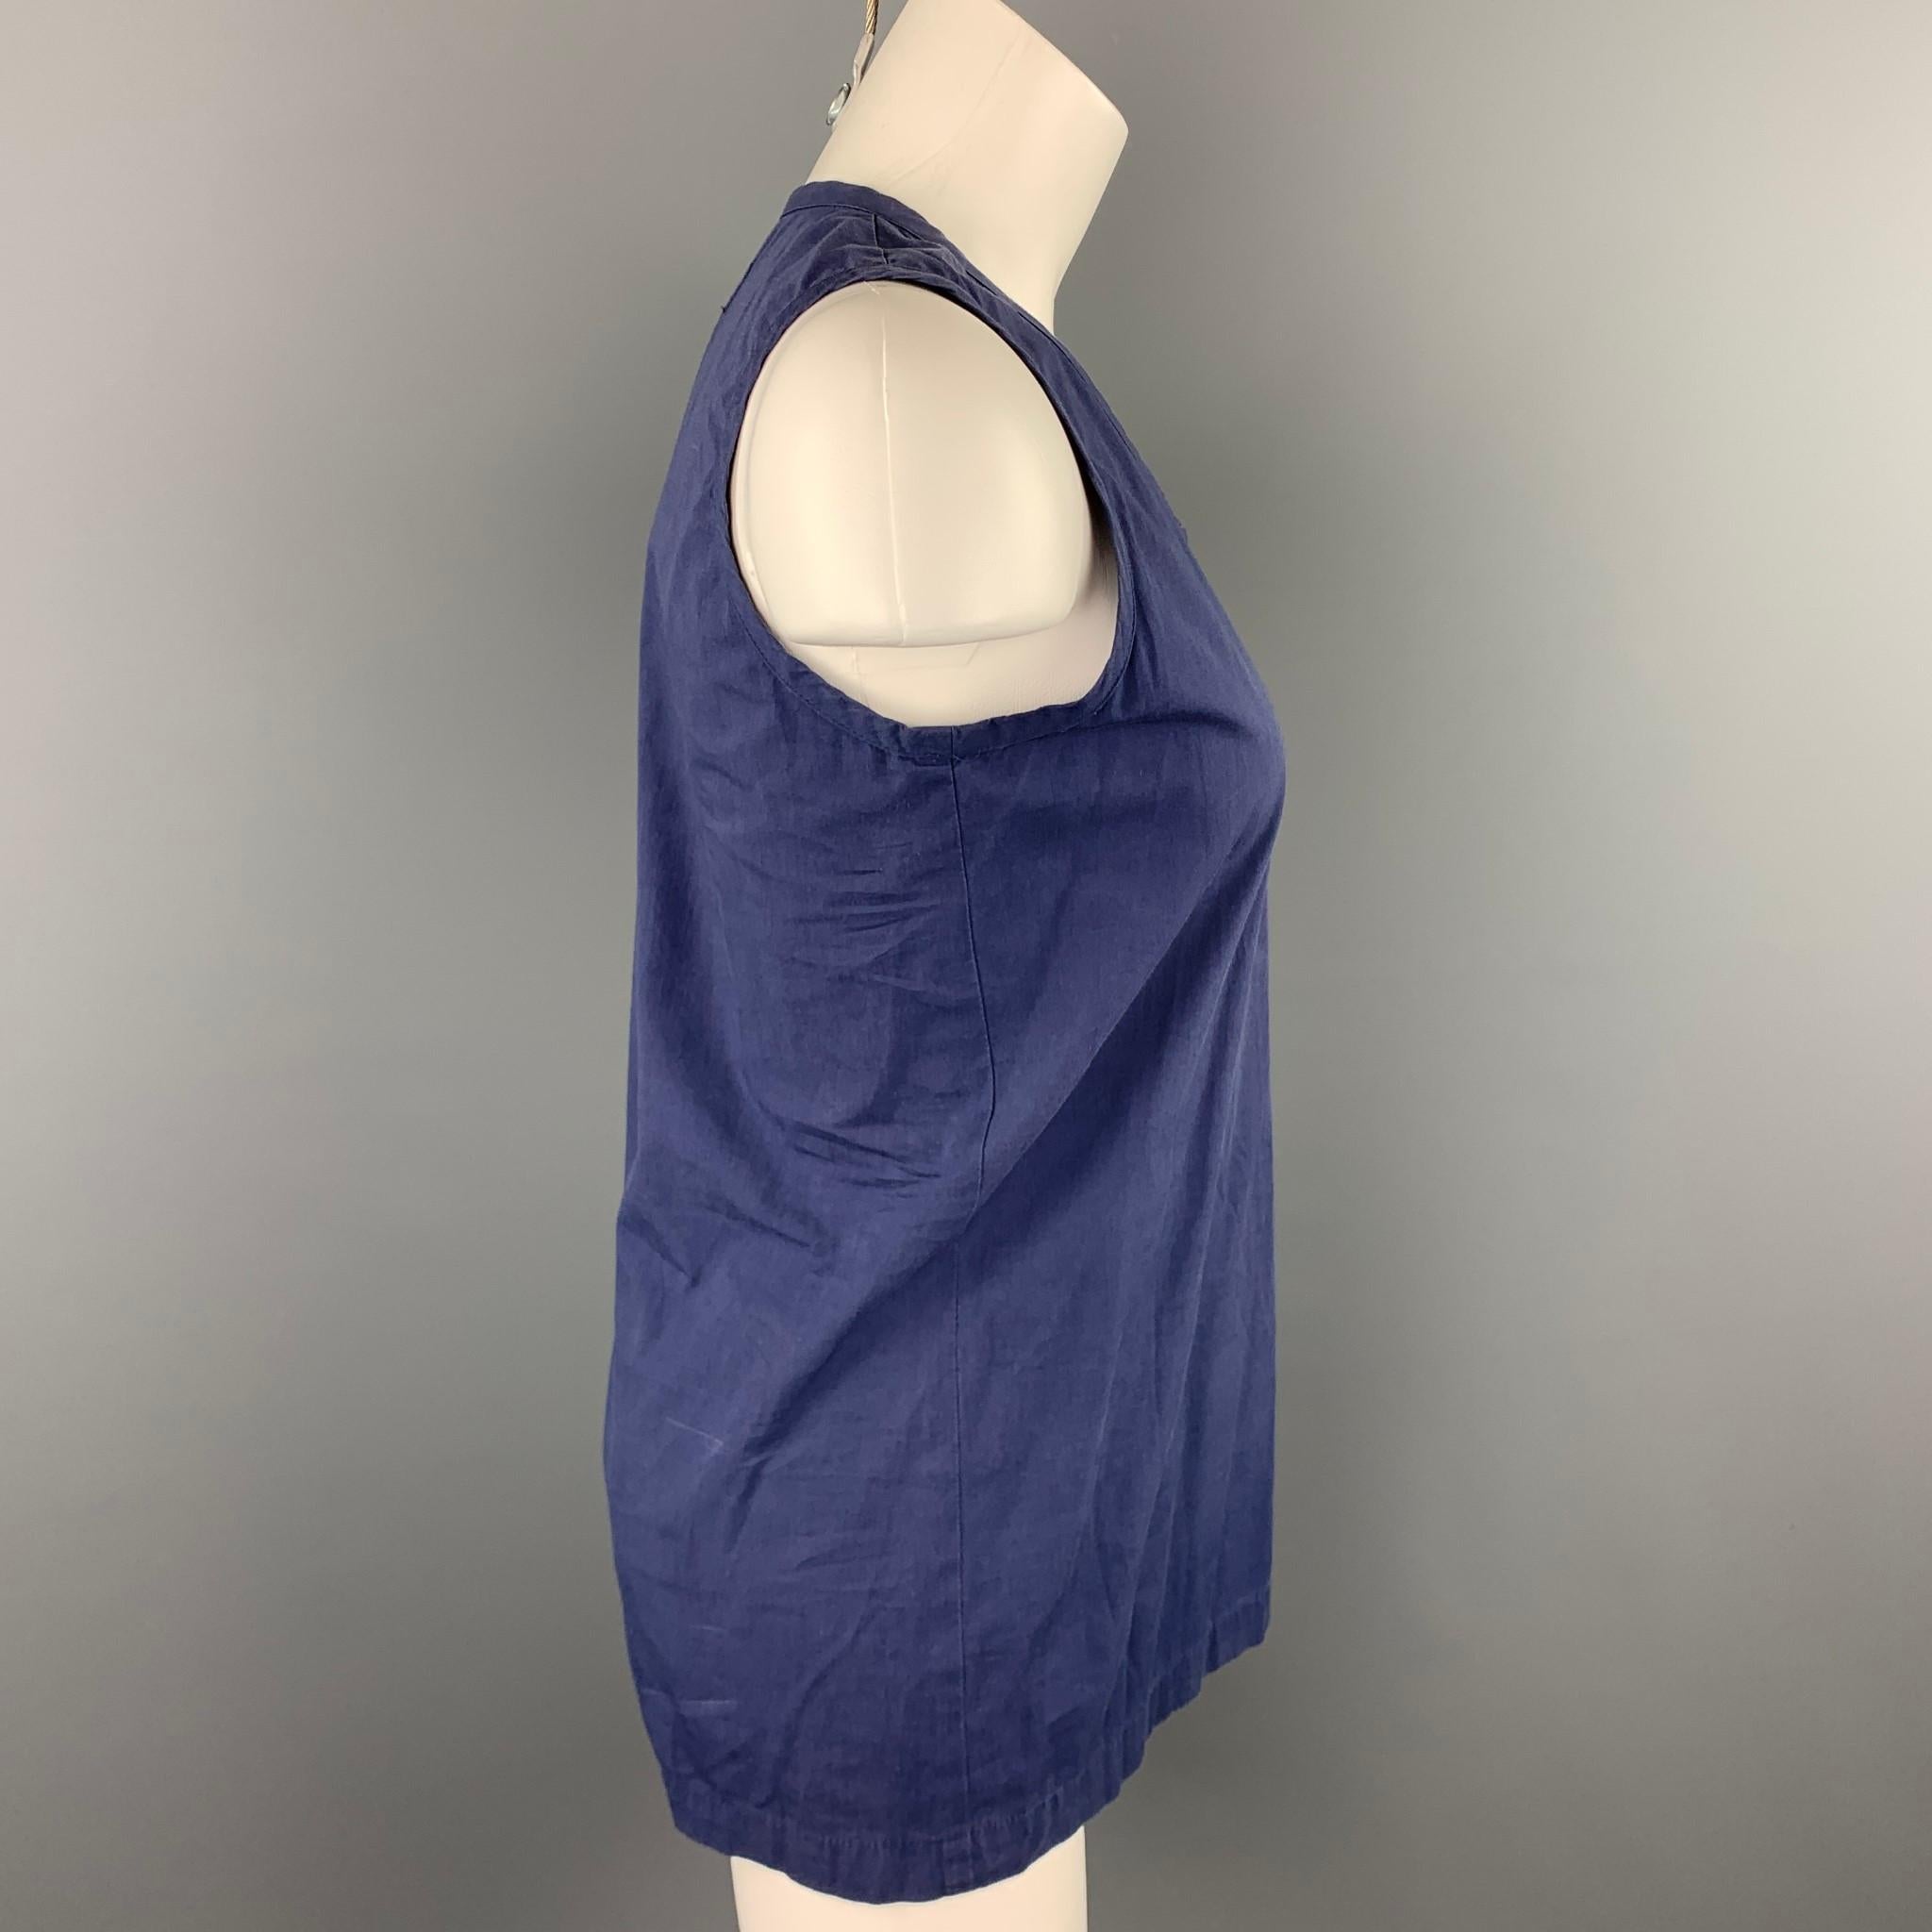 COMME des GARCONS tank top comes in a blue cotton featuring a scoop neck. Discoloration throughout. As-Is. Made in Japan.

Fair Pre-Owned Condition.
Marked: No size marked

Measurements:

Shoulder: 12 in. 
Bust: 36 in. 
Length: 26 in. 